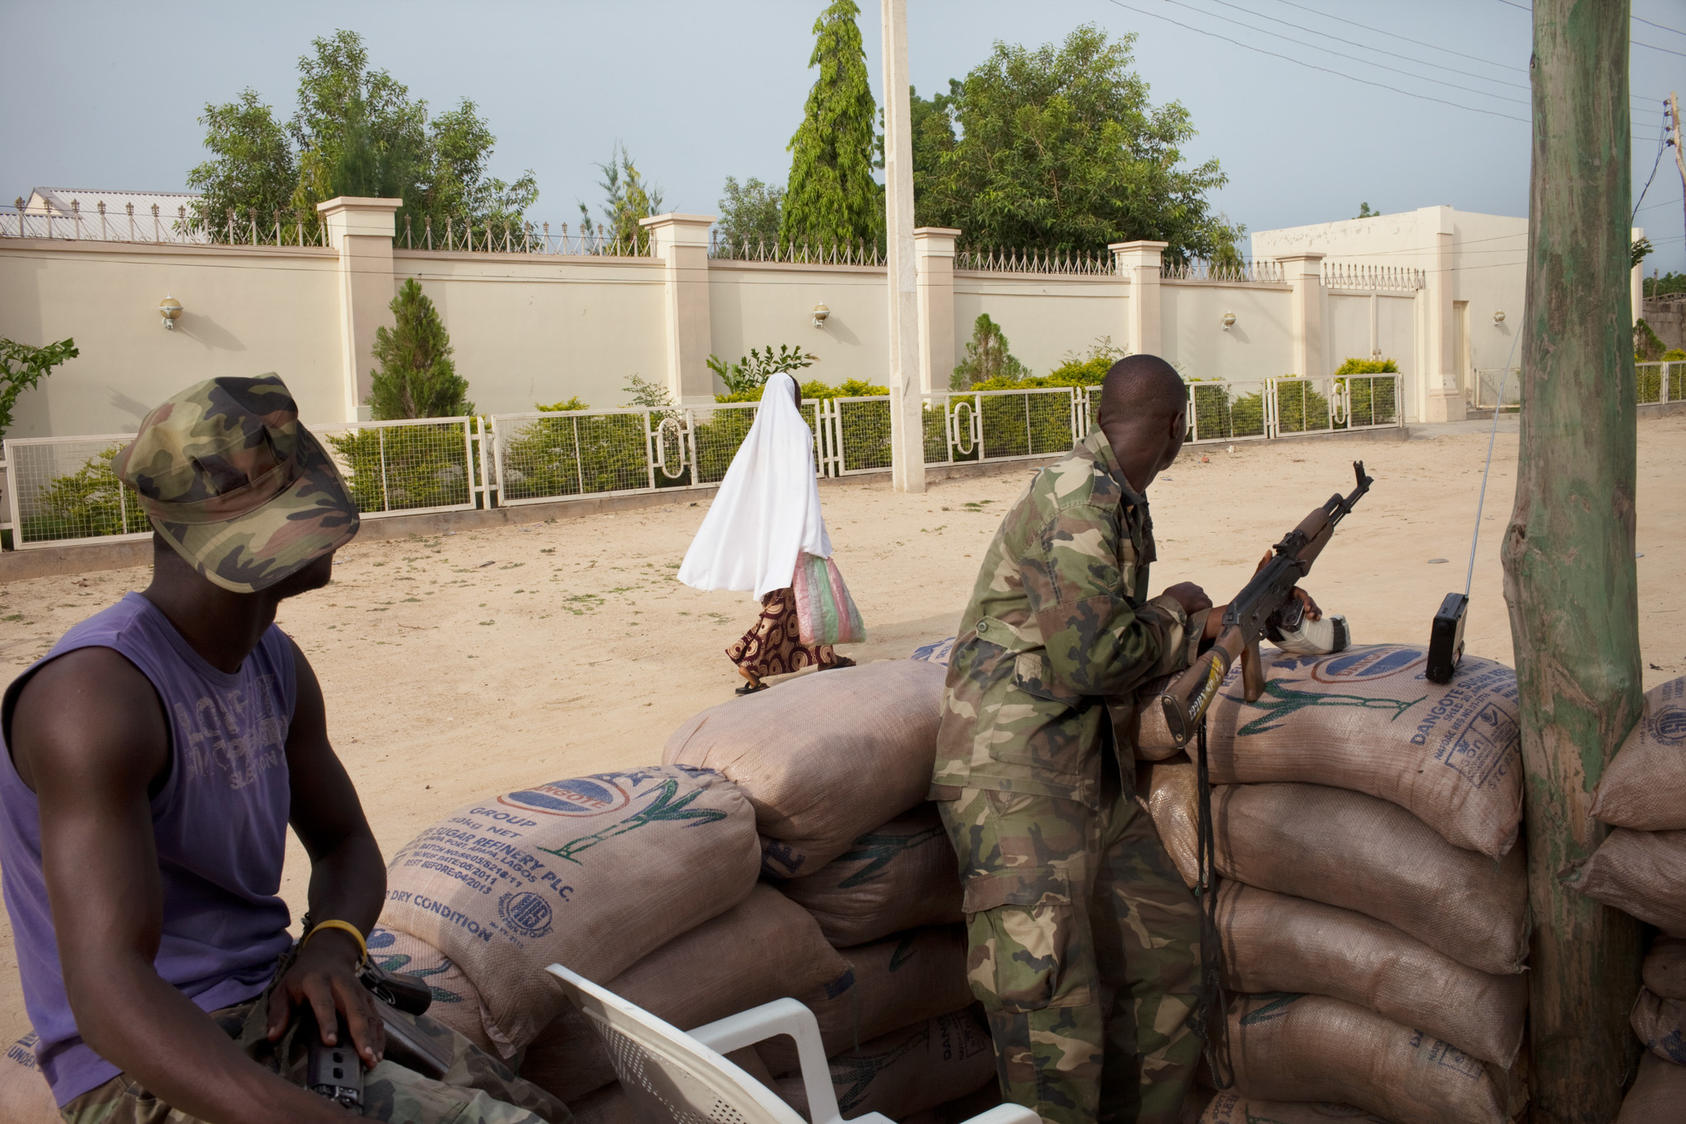 Nigerian soldiers survey passing civilians in the government reserved area of Maiduguri, in north-eastern Nigeria, July 19, 2011. Photo Credit: The New York Times/Samuel James